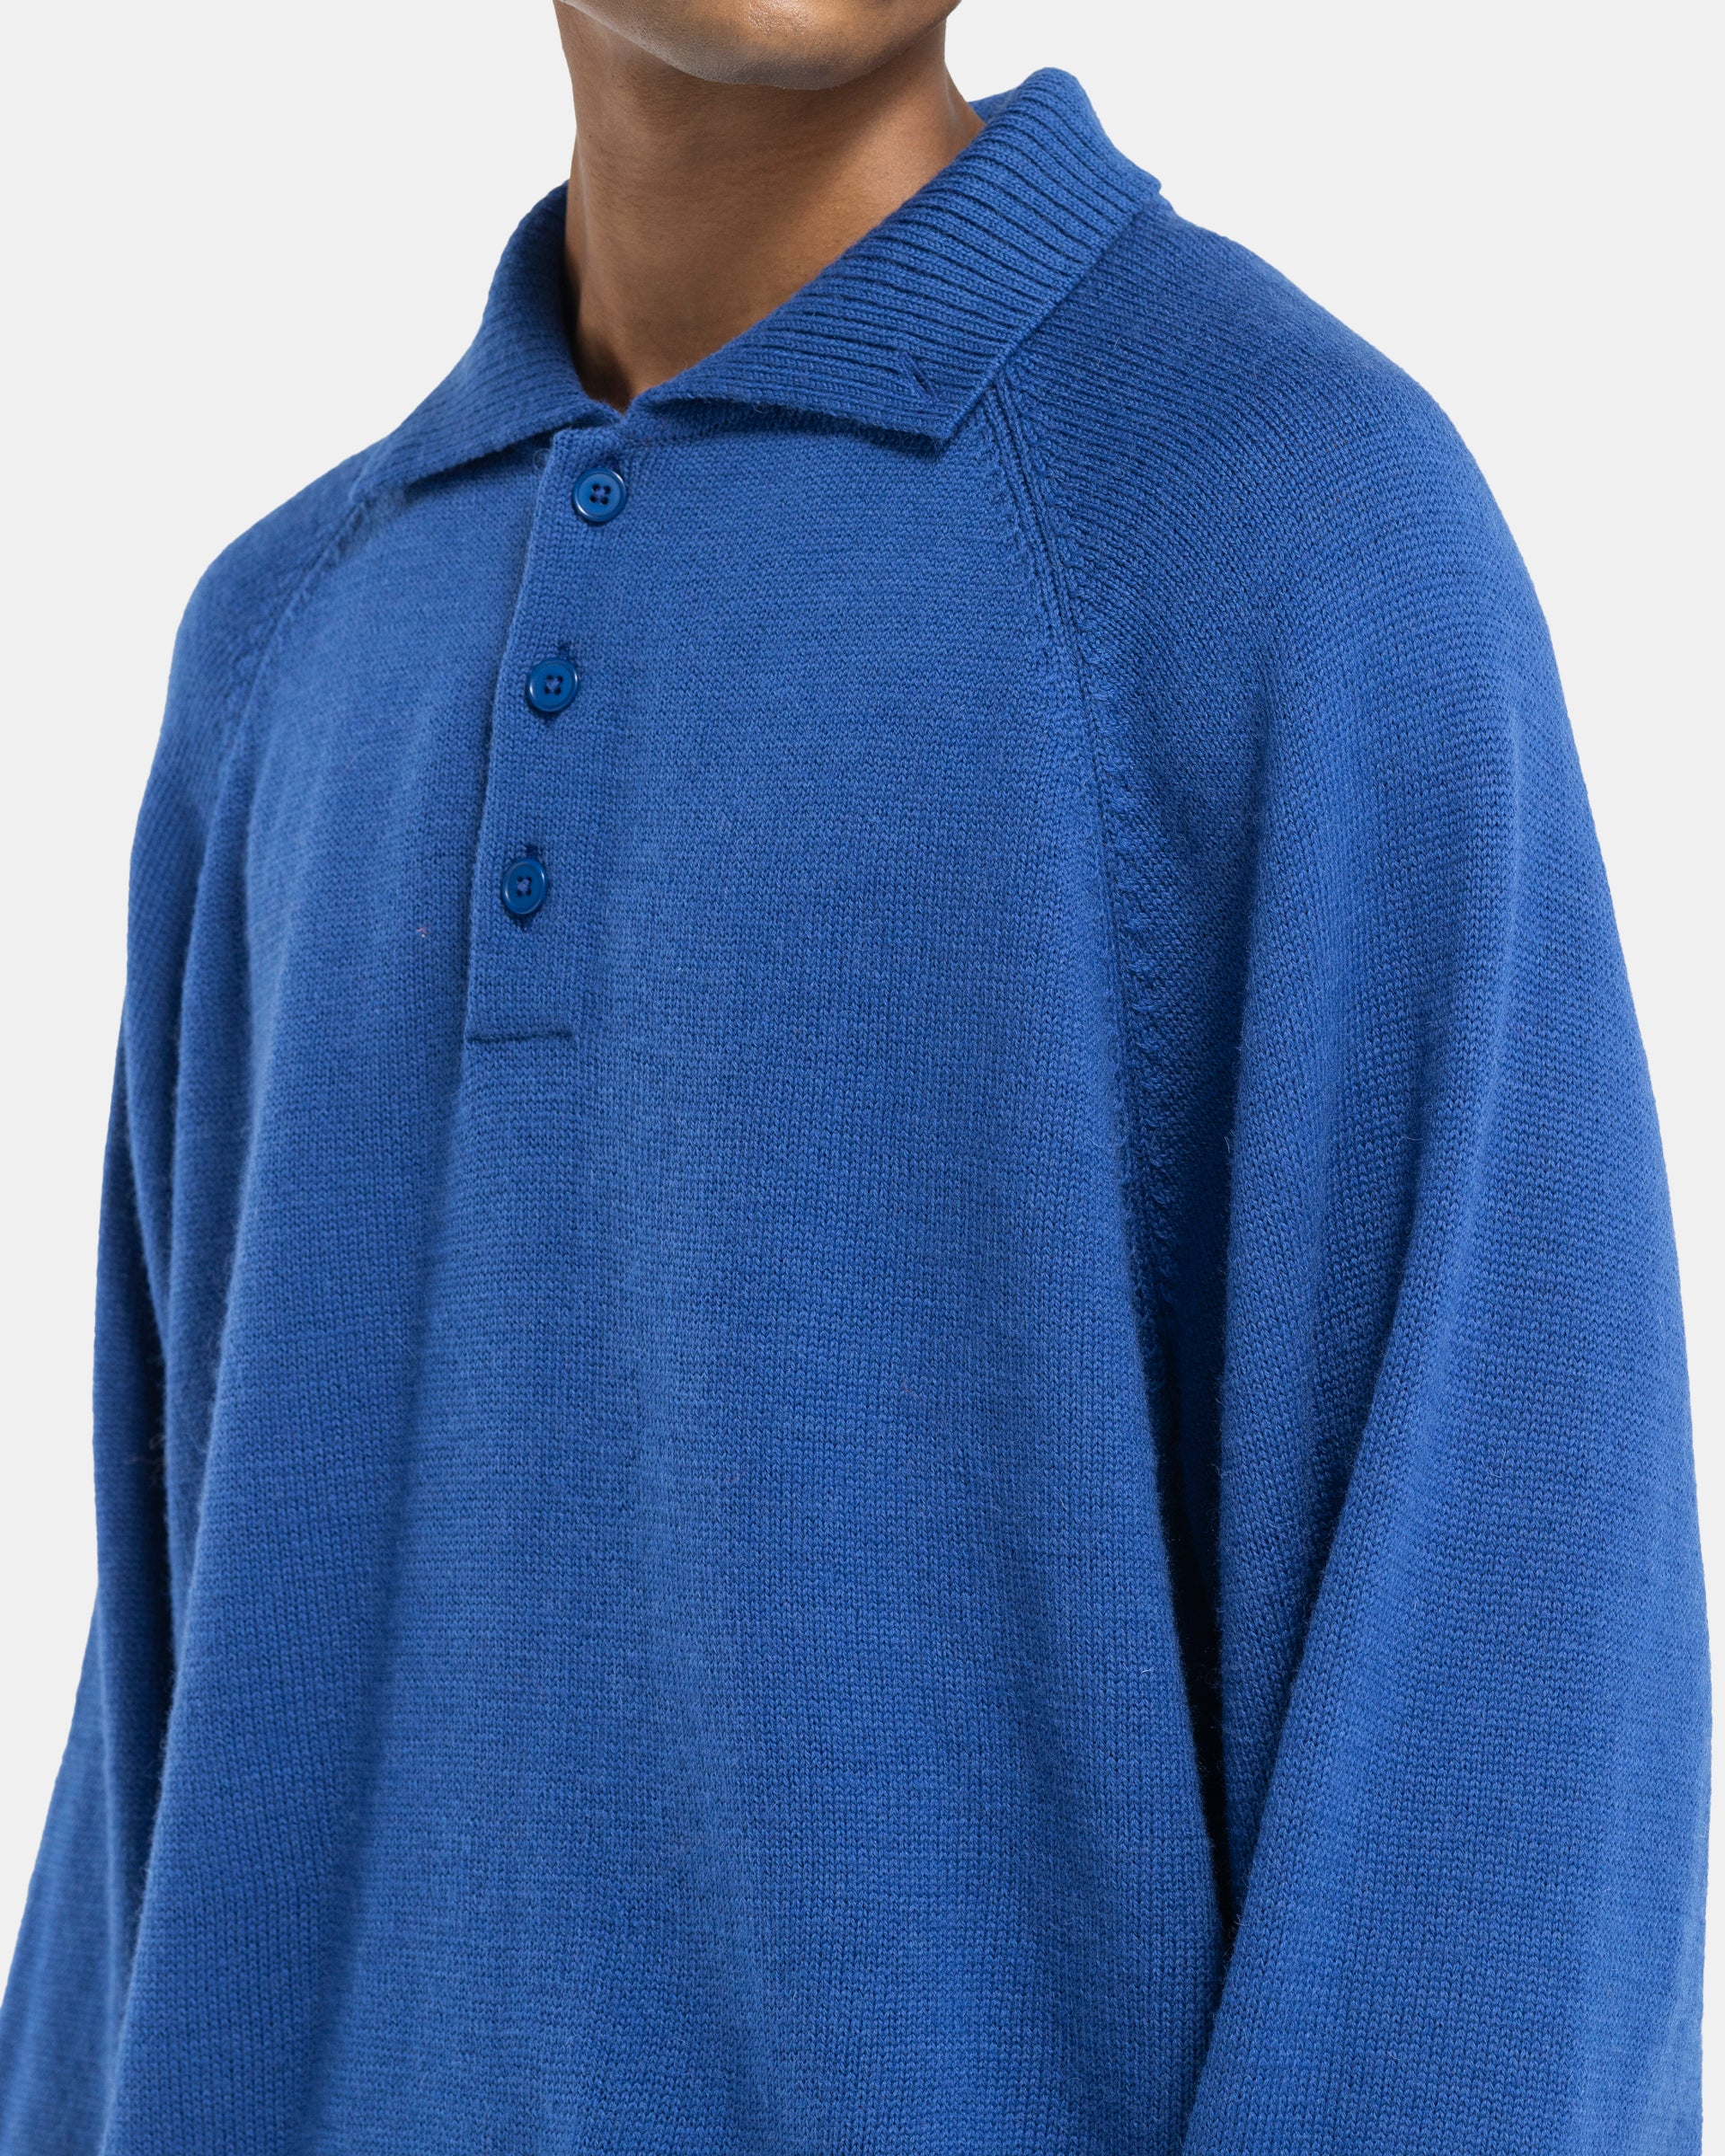 7G Knit Polo in Royal Blue